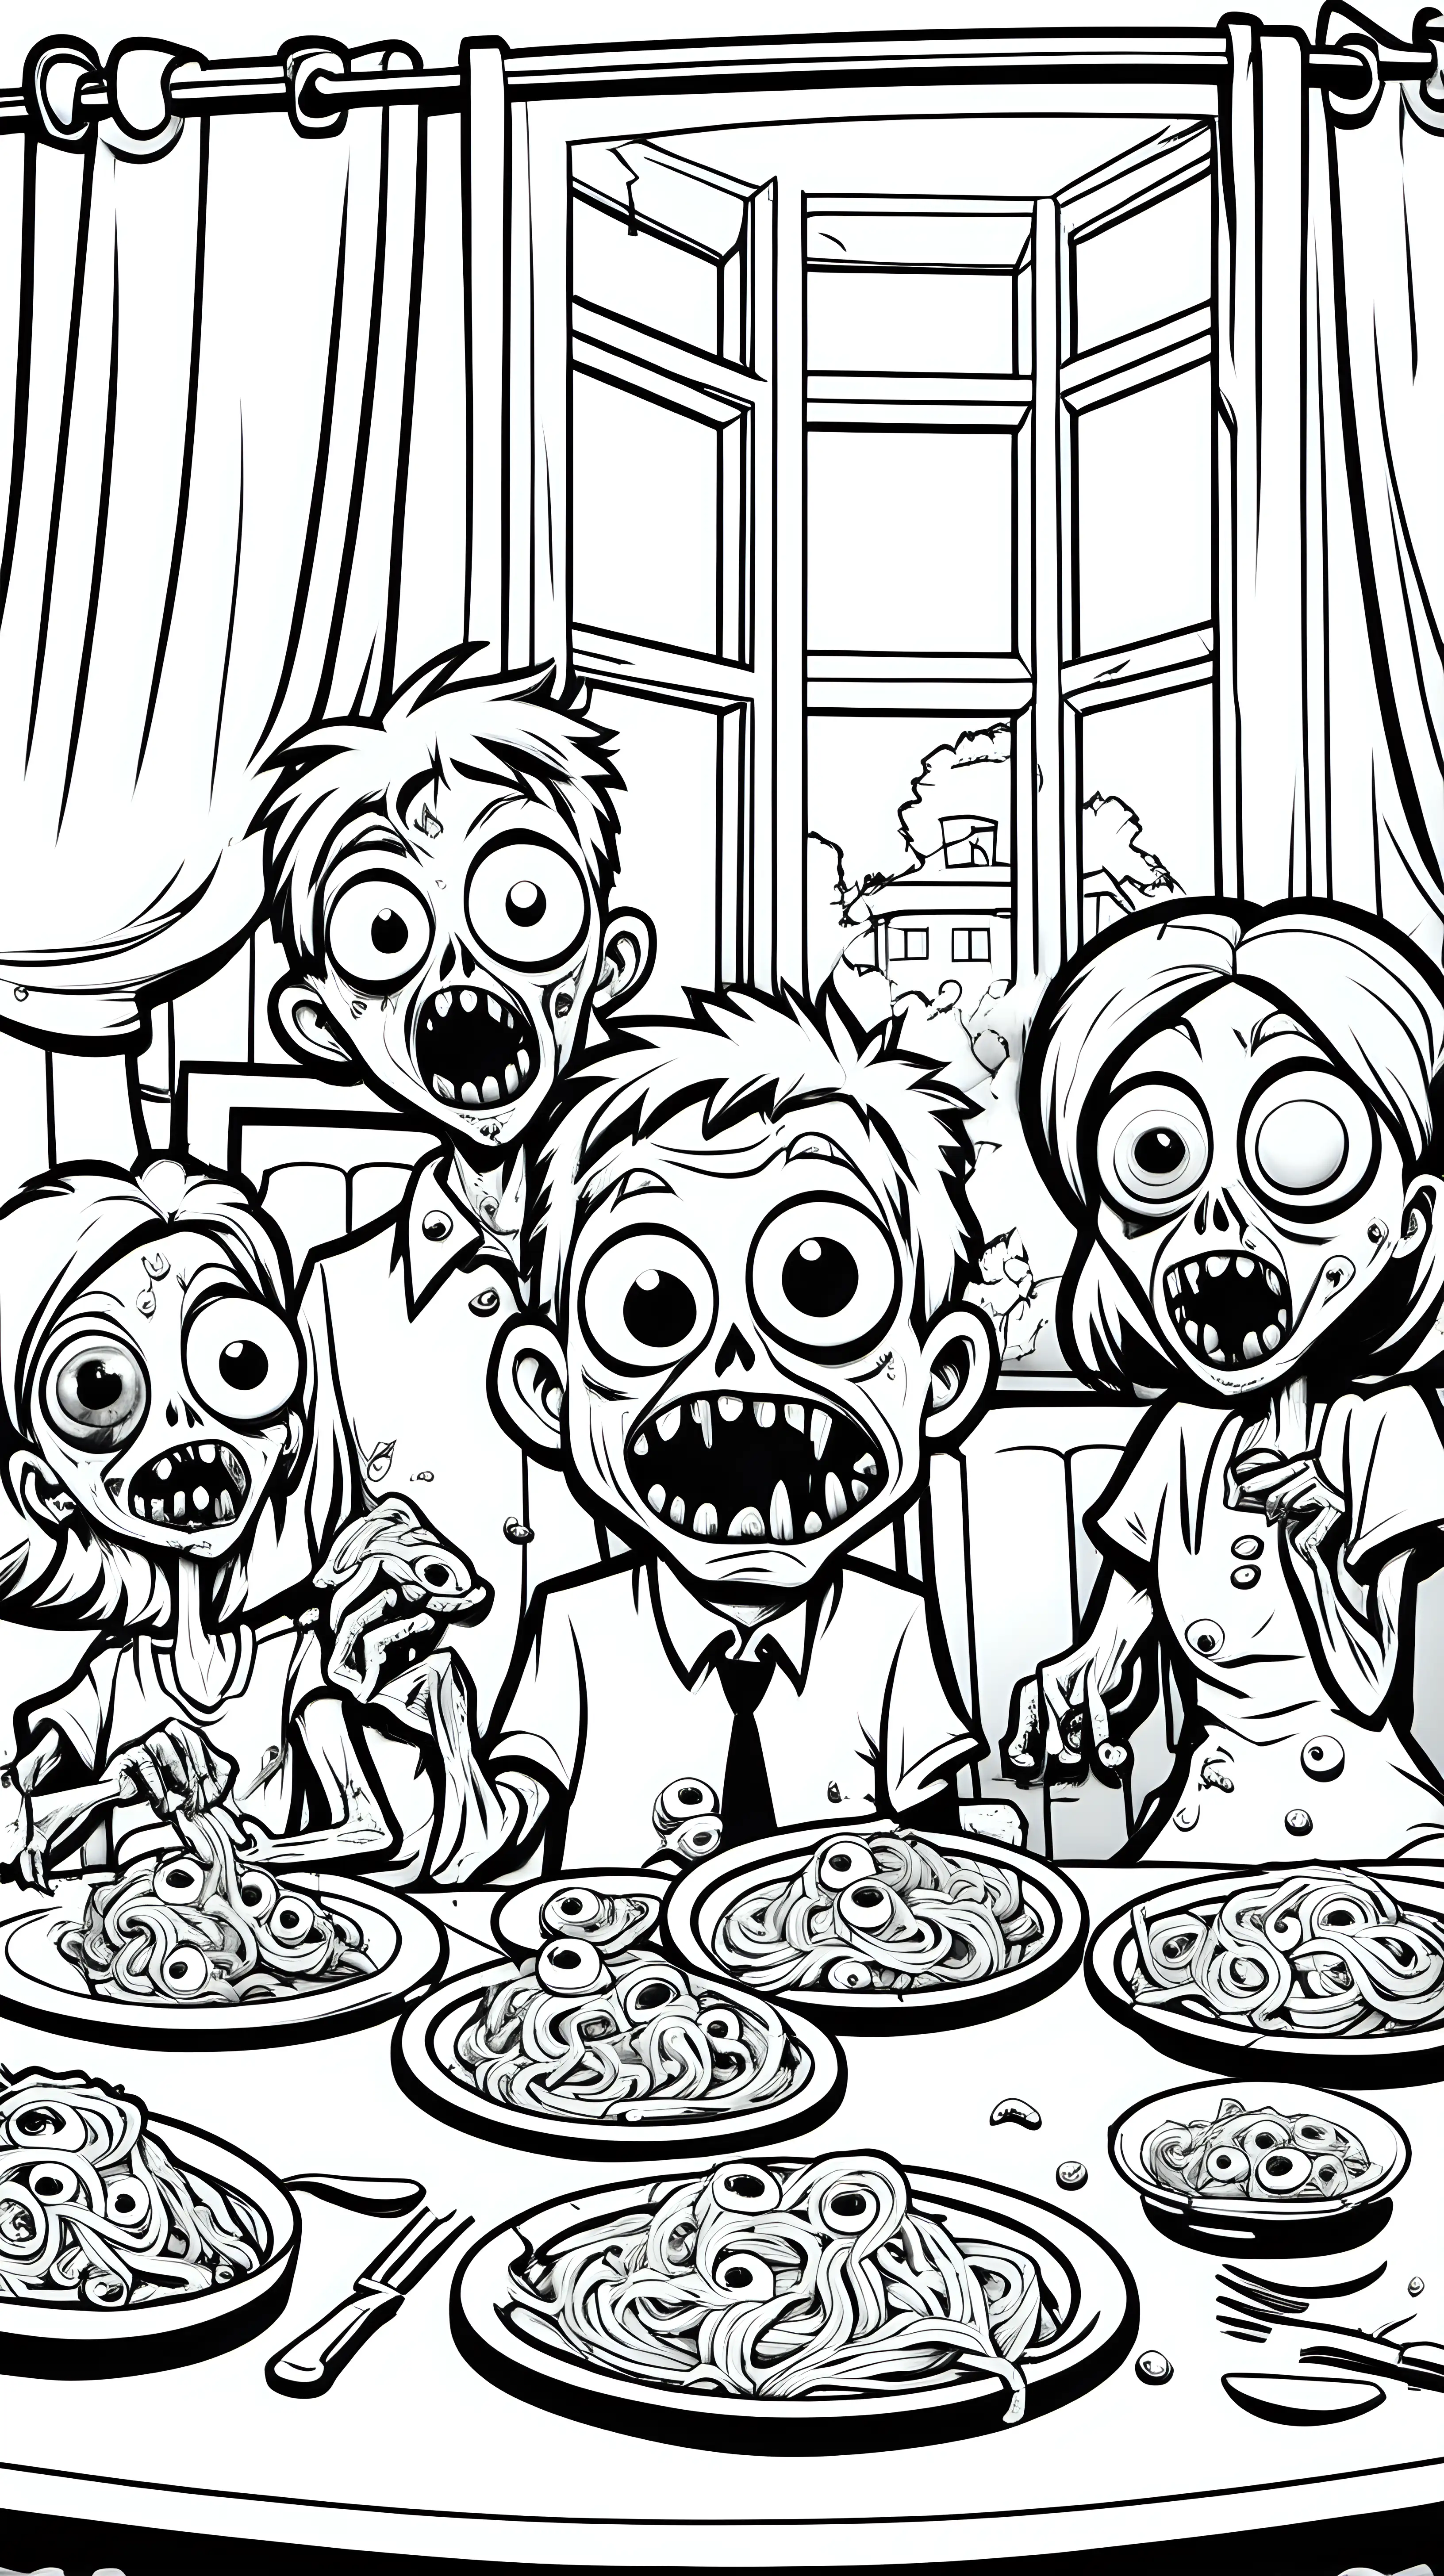 Cute Funny Zombie Family Eating Eyeball Pasta in Dining Room Coloring Page